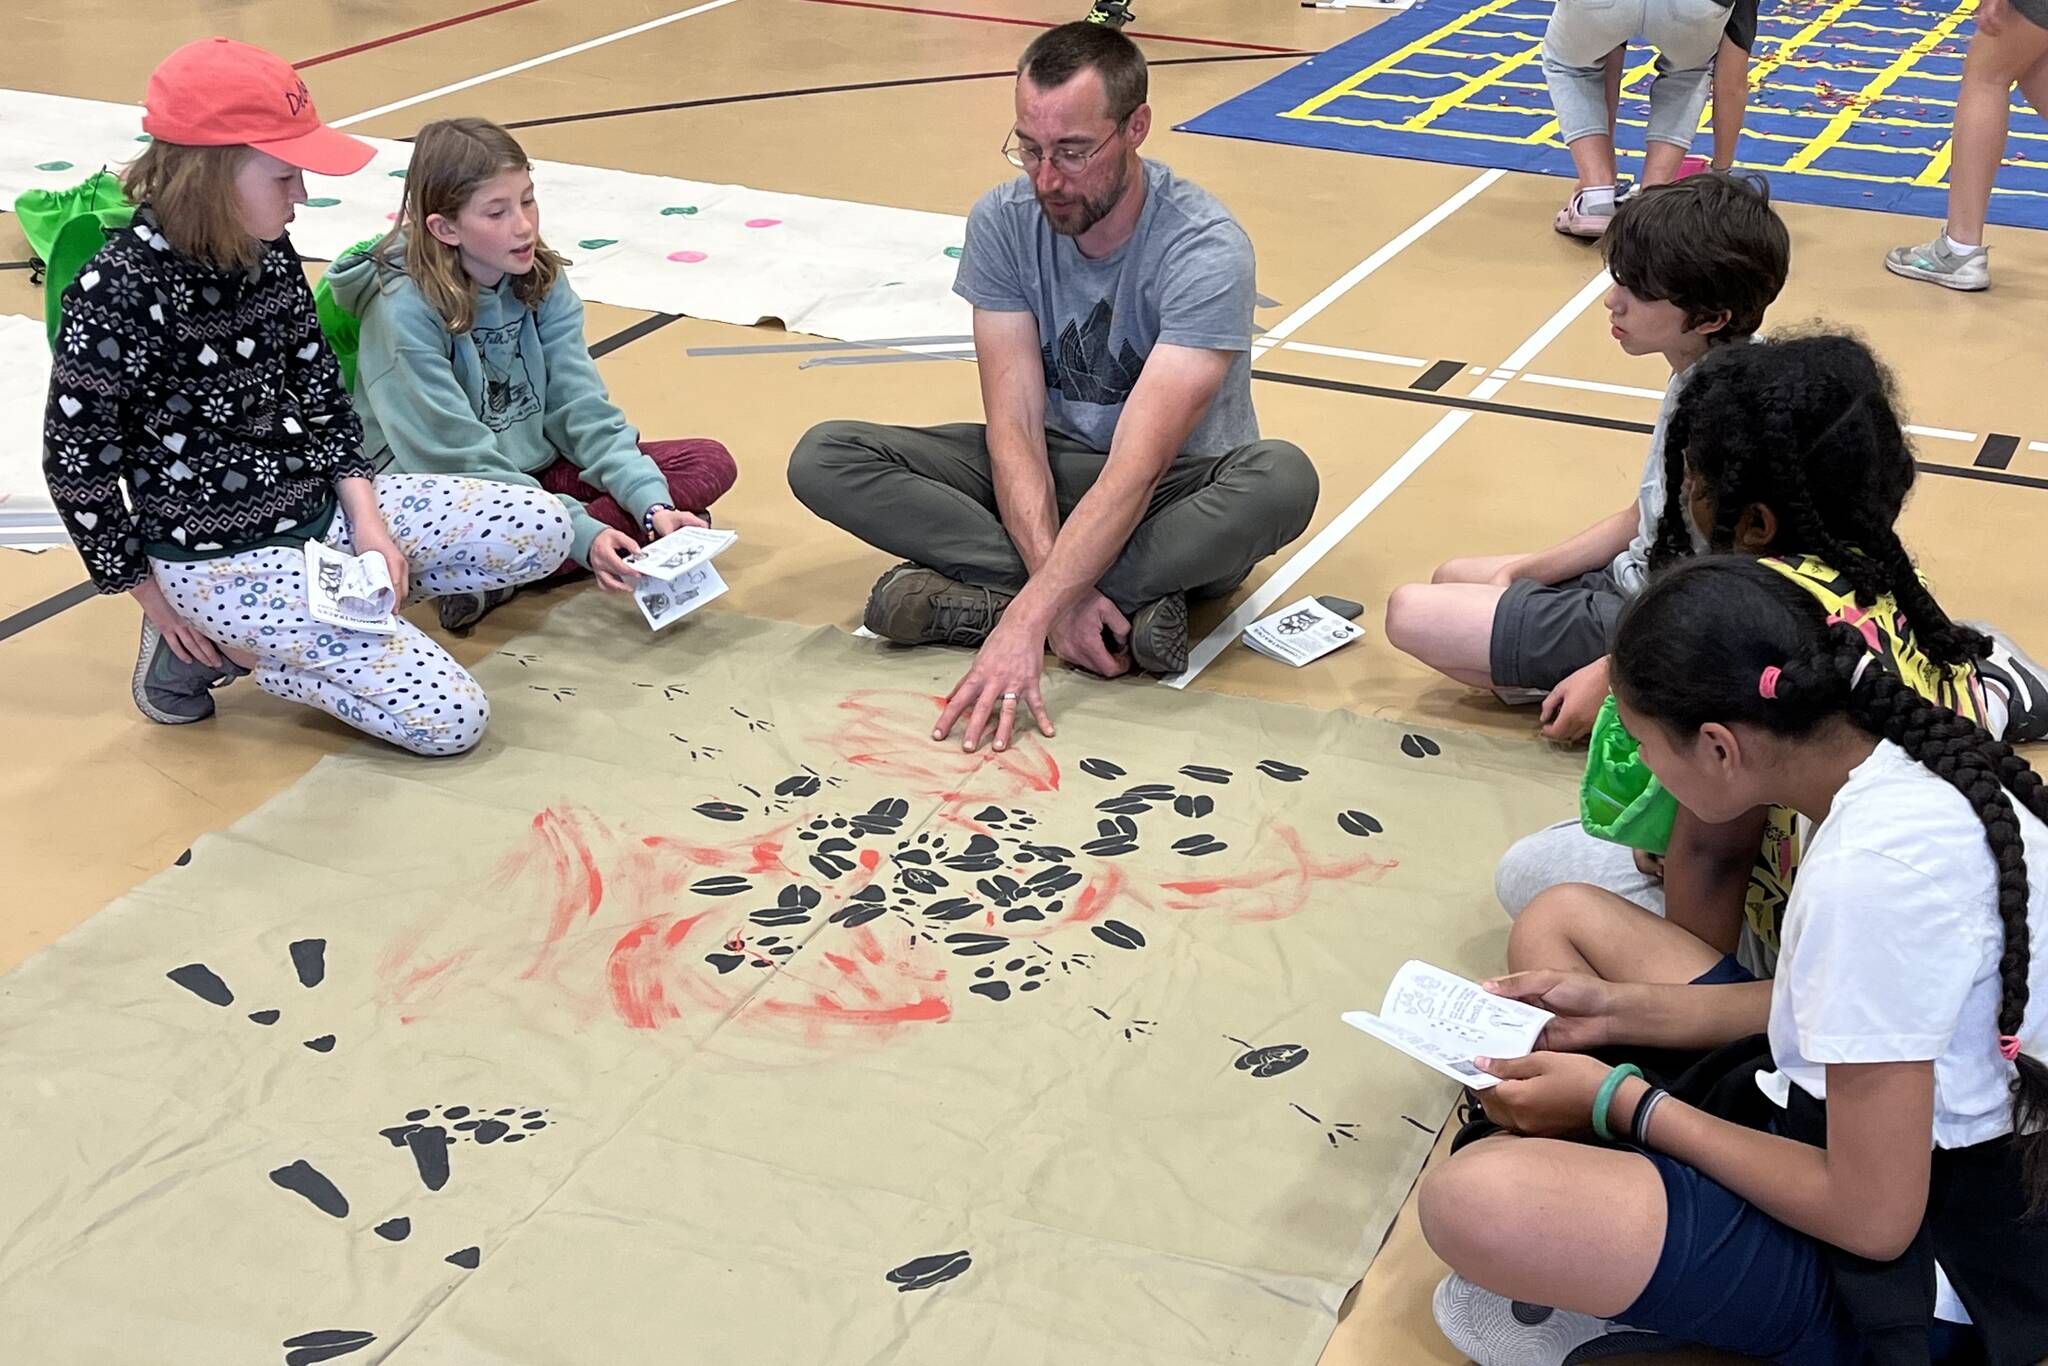 Joel Bos from Discovery Southeast doing an Animal Tracking activity with students from Sayéik: Gastineau Community School during Thursday’s STEAM event. (Jonson Kuhn / Juneau Empire)